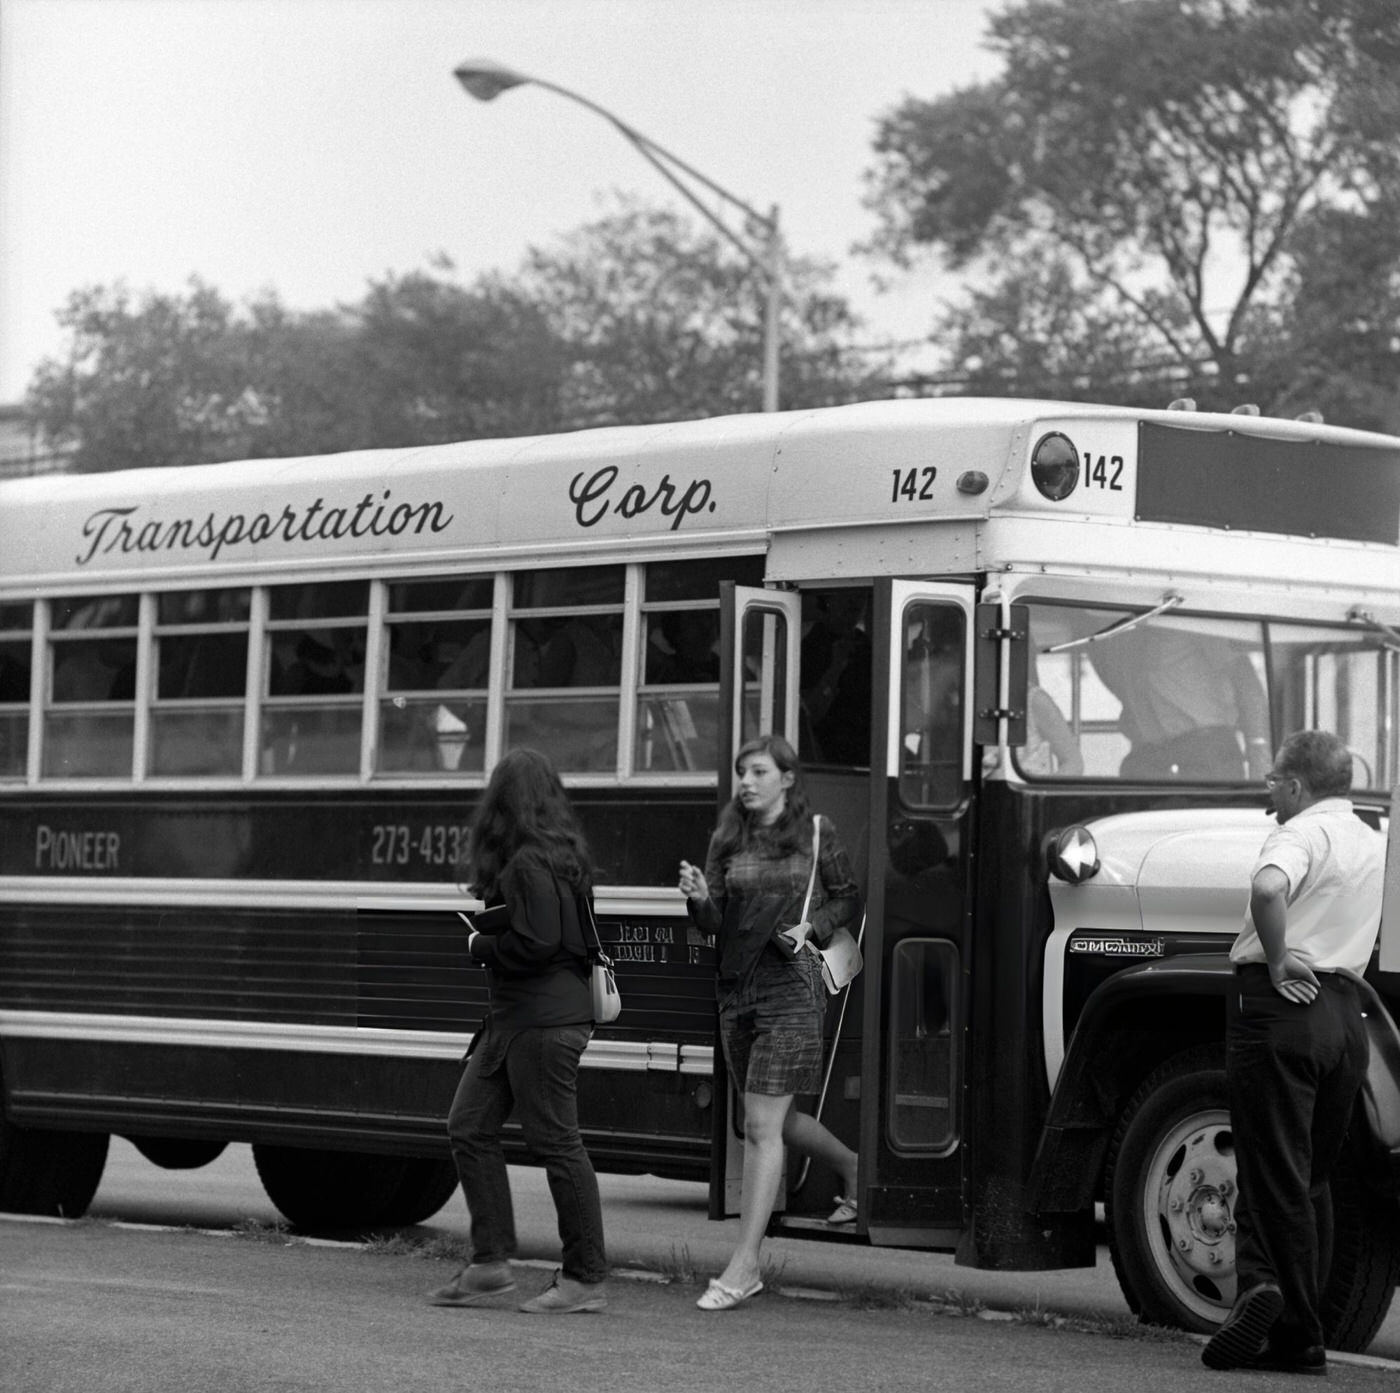 Teenage Beatles Fans Exit A Chartered Bus In The Parking Lot Of Shea Stadium On Their Way To See The Band Live On Their Last American Tour, 1966.